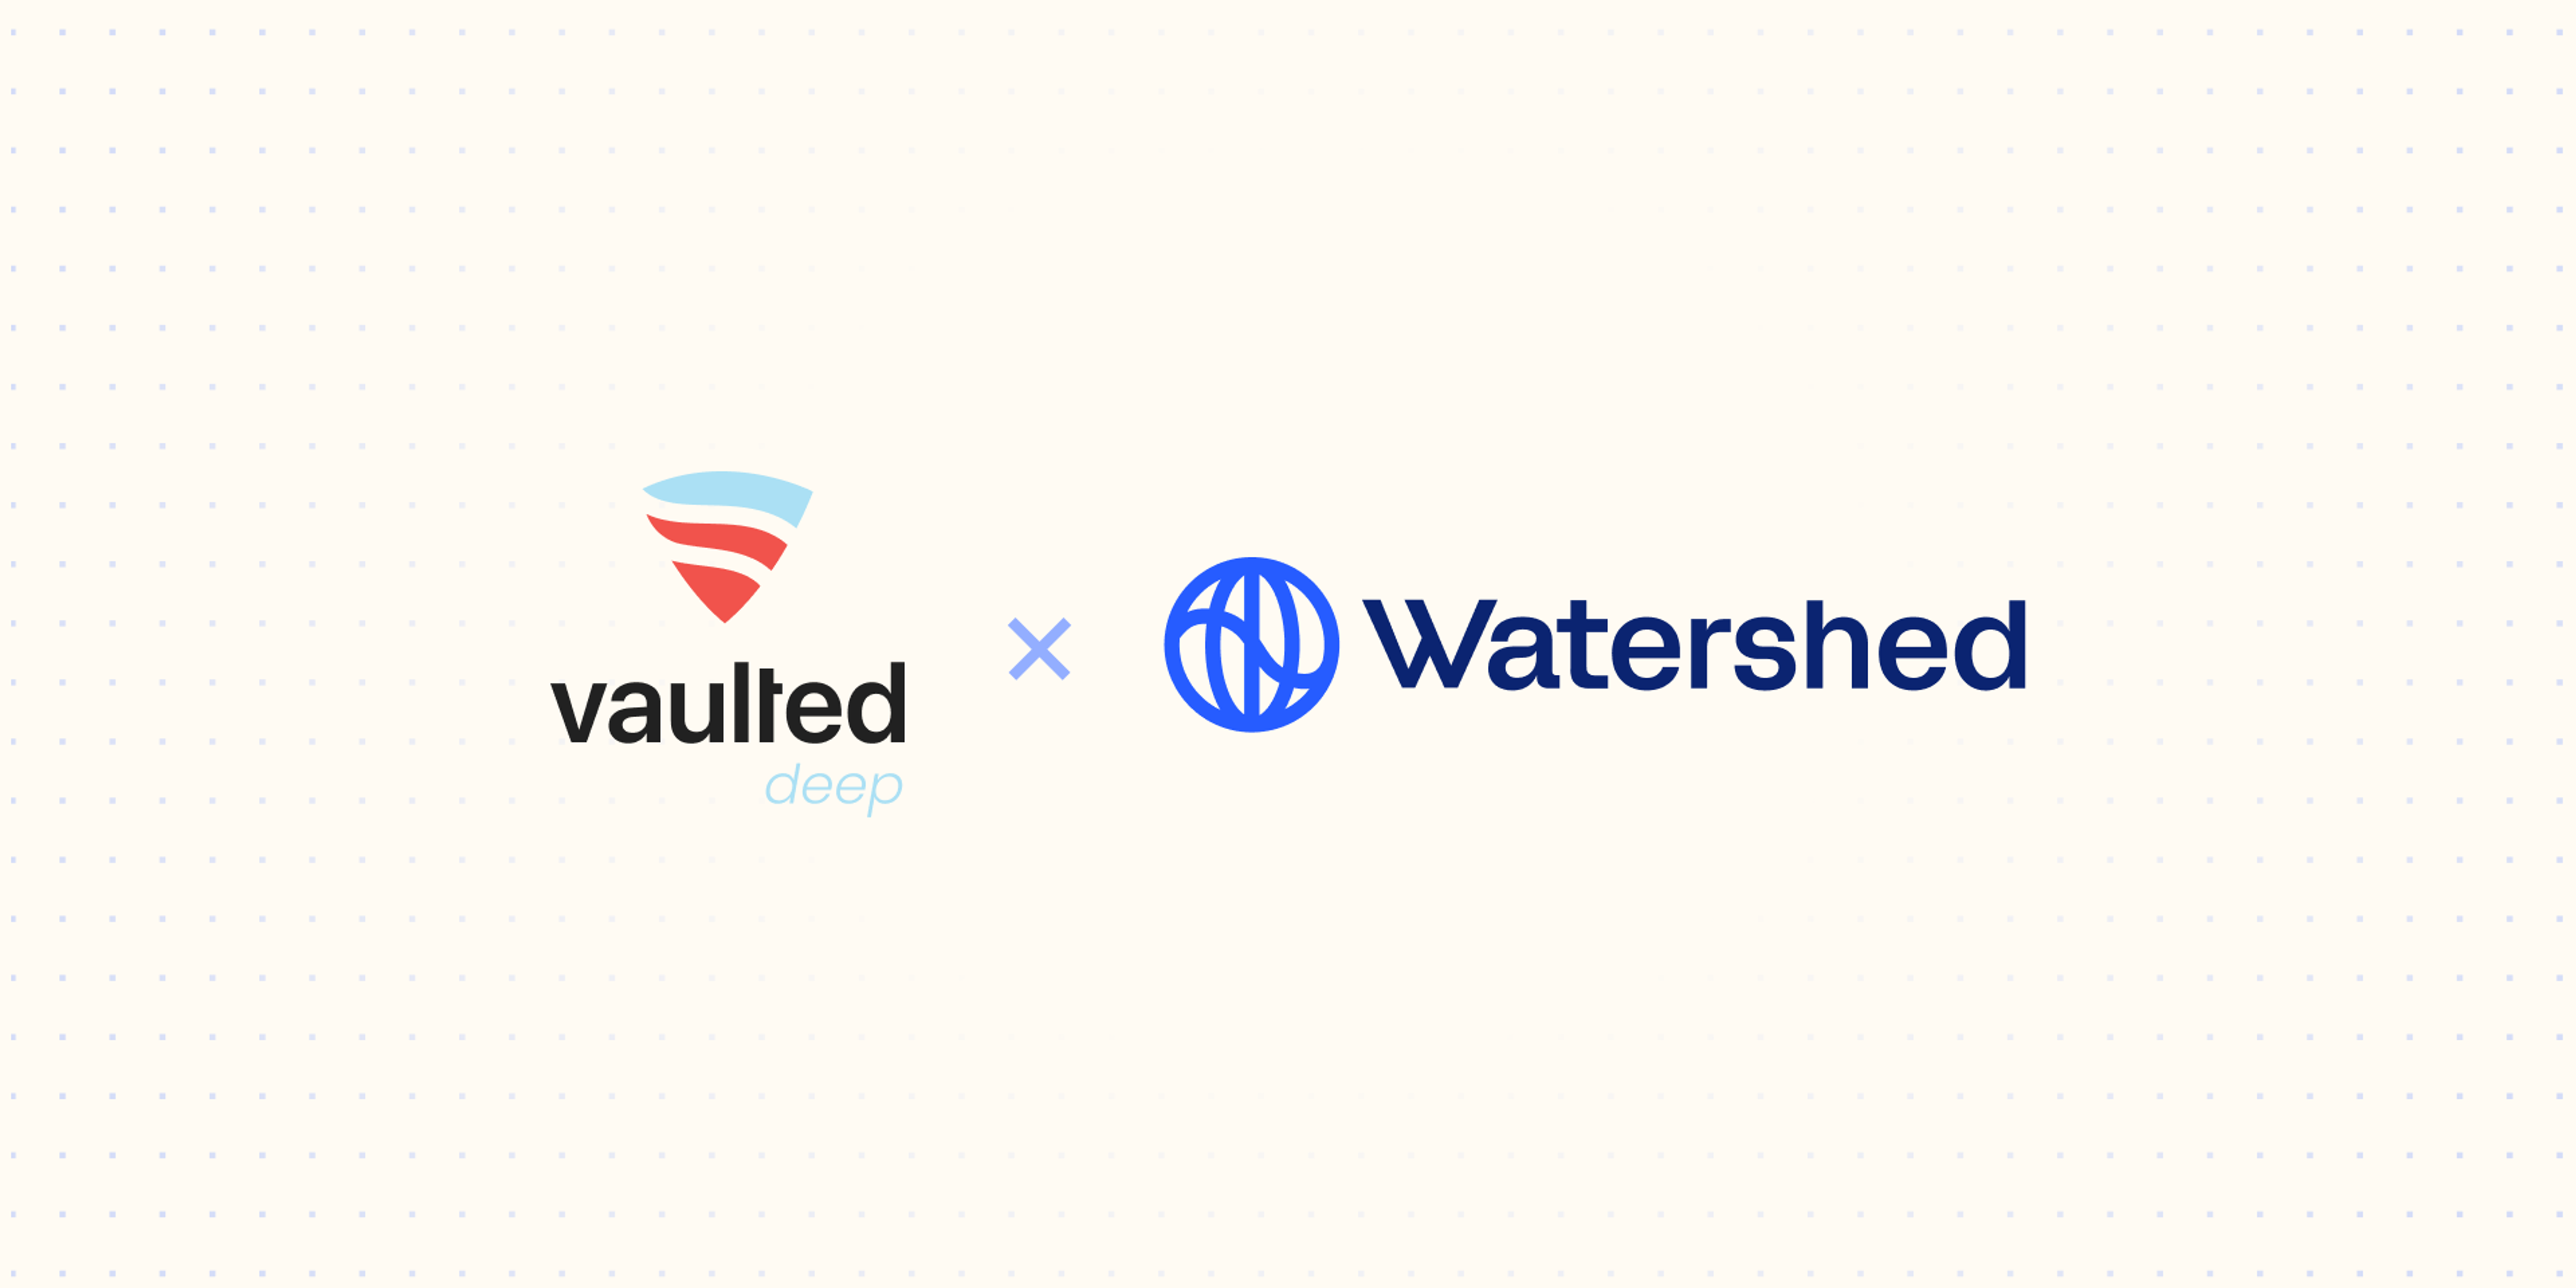 Vaulted Deep and Watershed logos